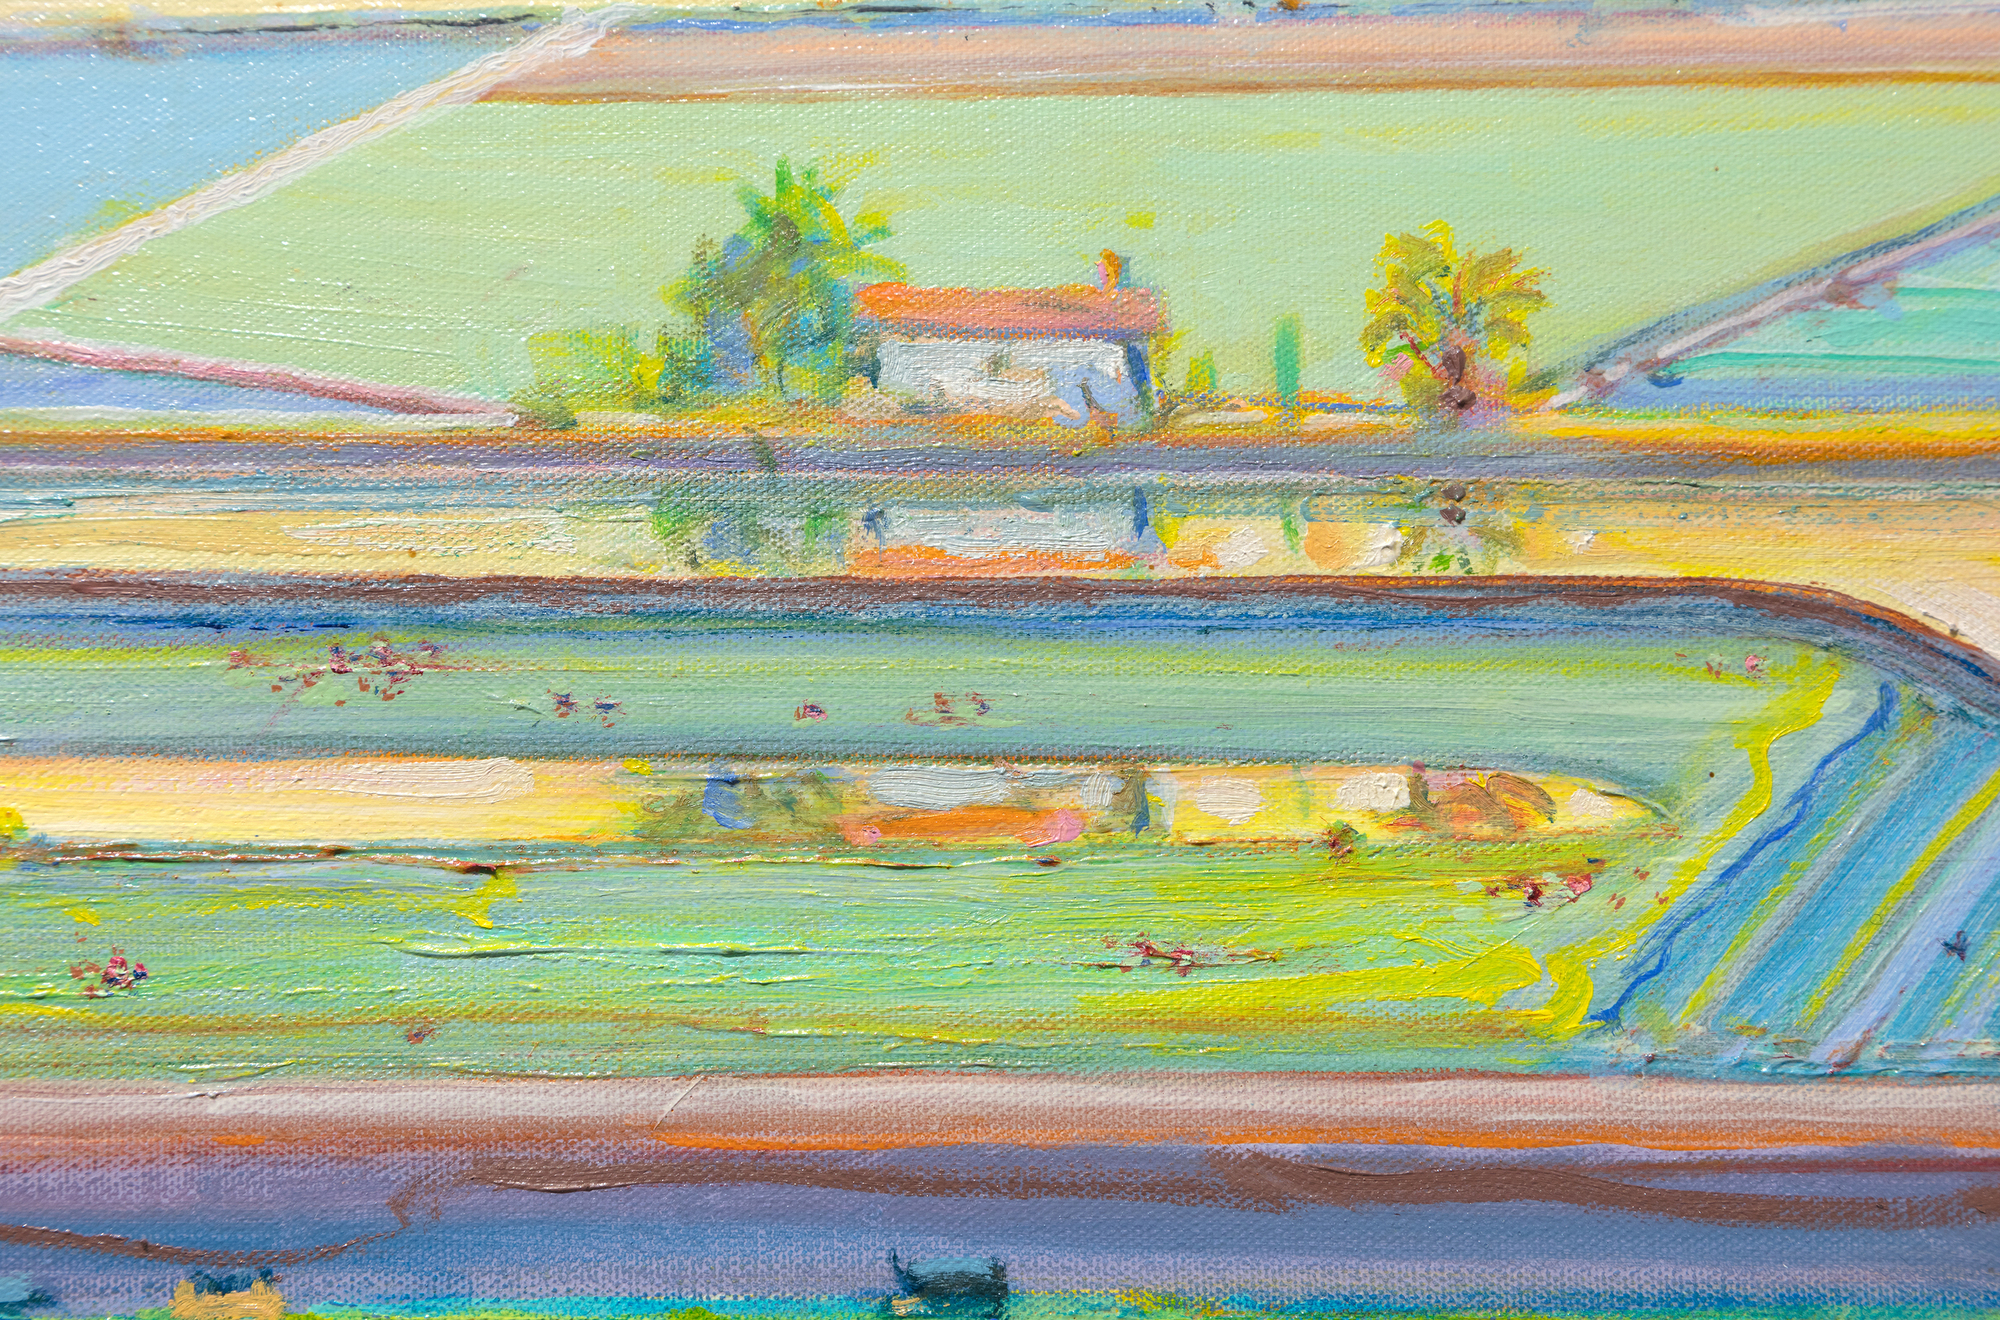 WAYNE THIEBAUD - The Riverhouse - oil on canvas - 18 x 35 3/4 in.